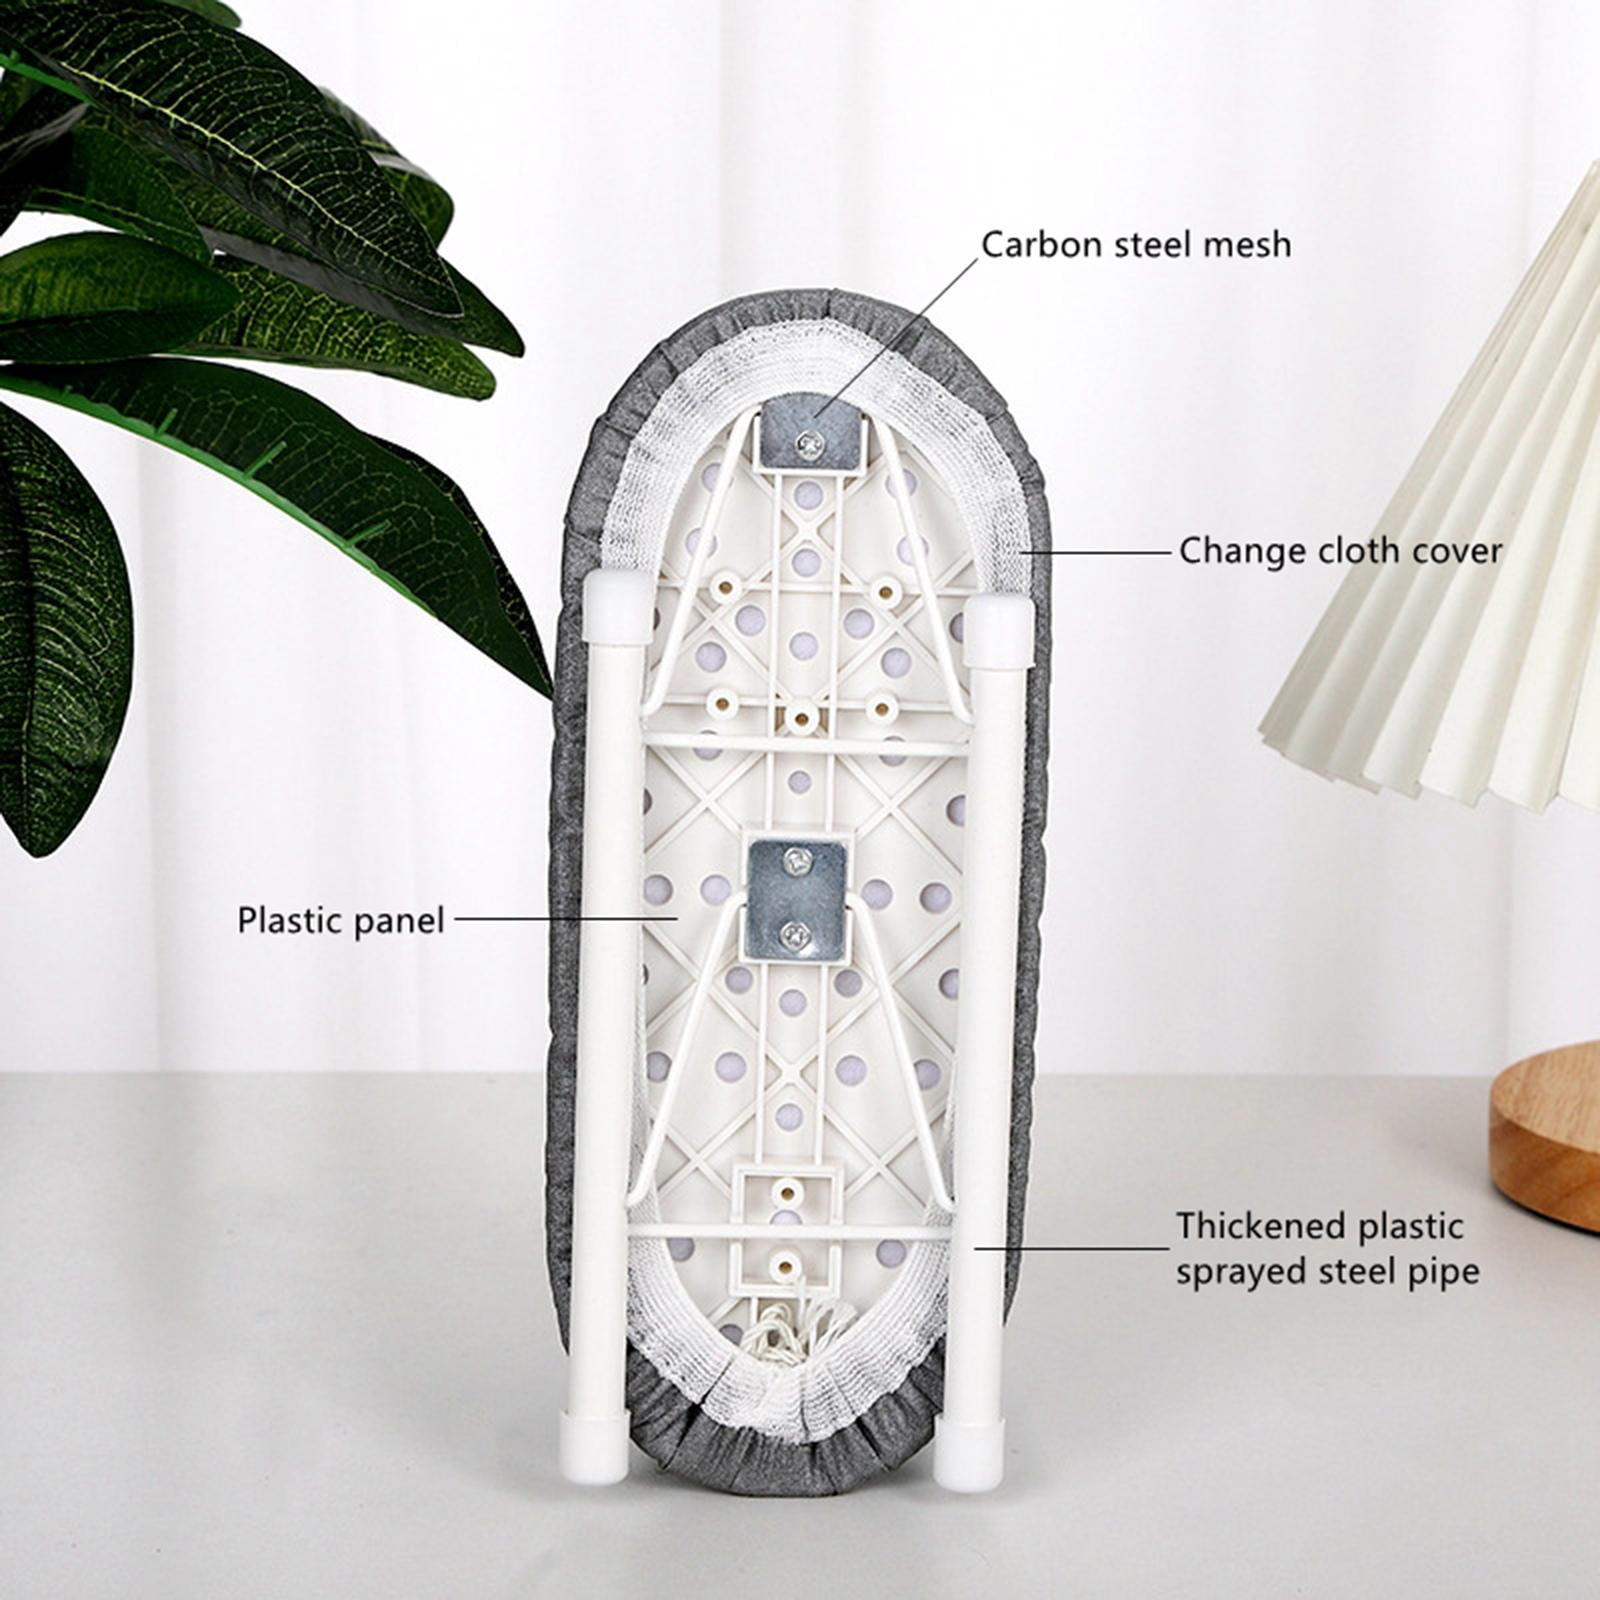 SheeChung Small Tabletop Ironing Board - Heavy Duty Ironing Board with Mesh  Metal Base & 100% Cotton Cover,Hook for Hanging,Portable Folding Mini Iron